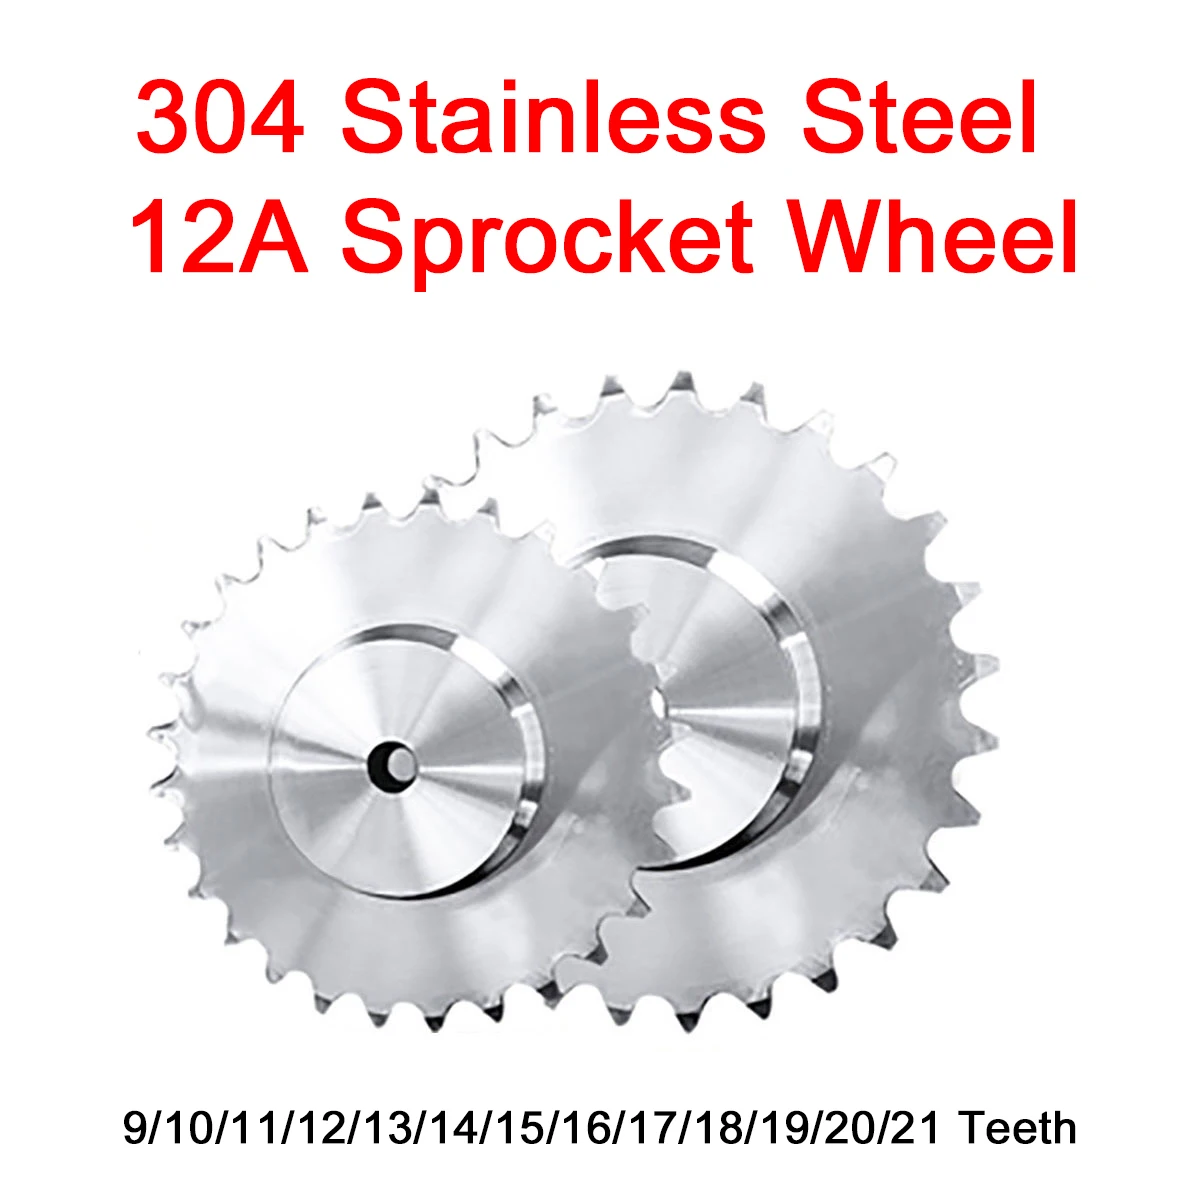 

1Pc 12A Sprocket Wheel 9/10/11/12/13/14/15/16/17/18/19/20/21 Teeth Chain Gear with Step 304 Stainless Steel Tooth Pitch 19.05mm